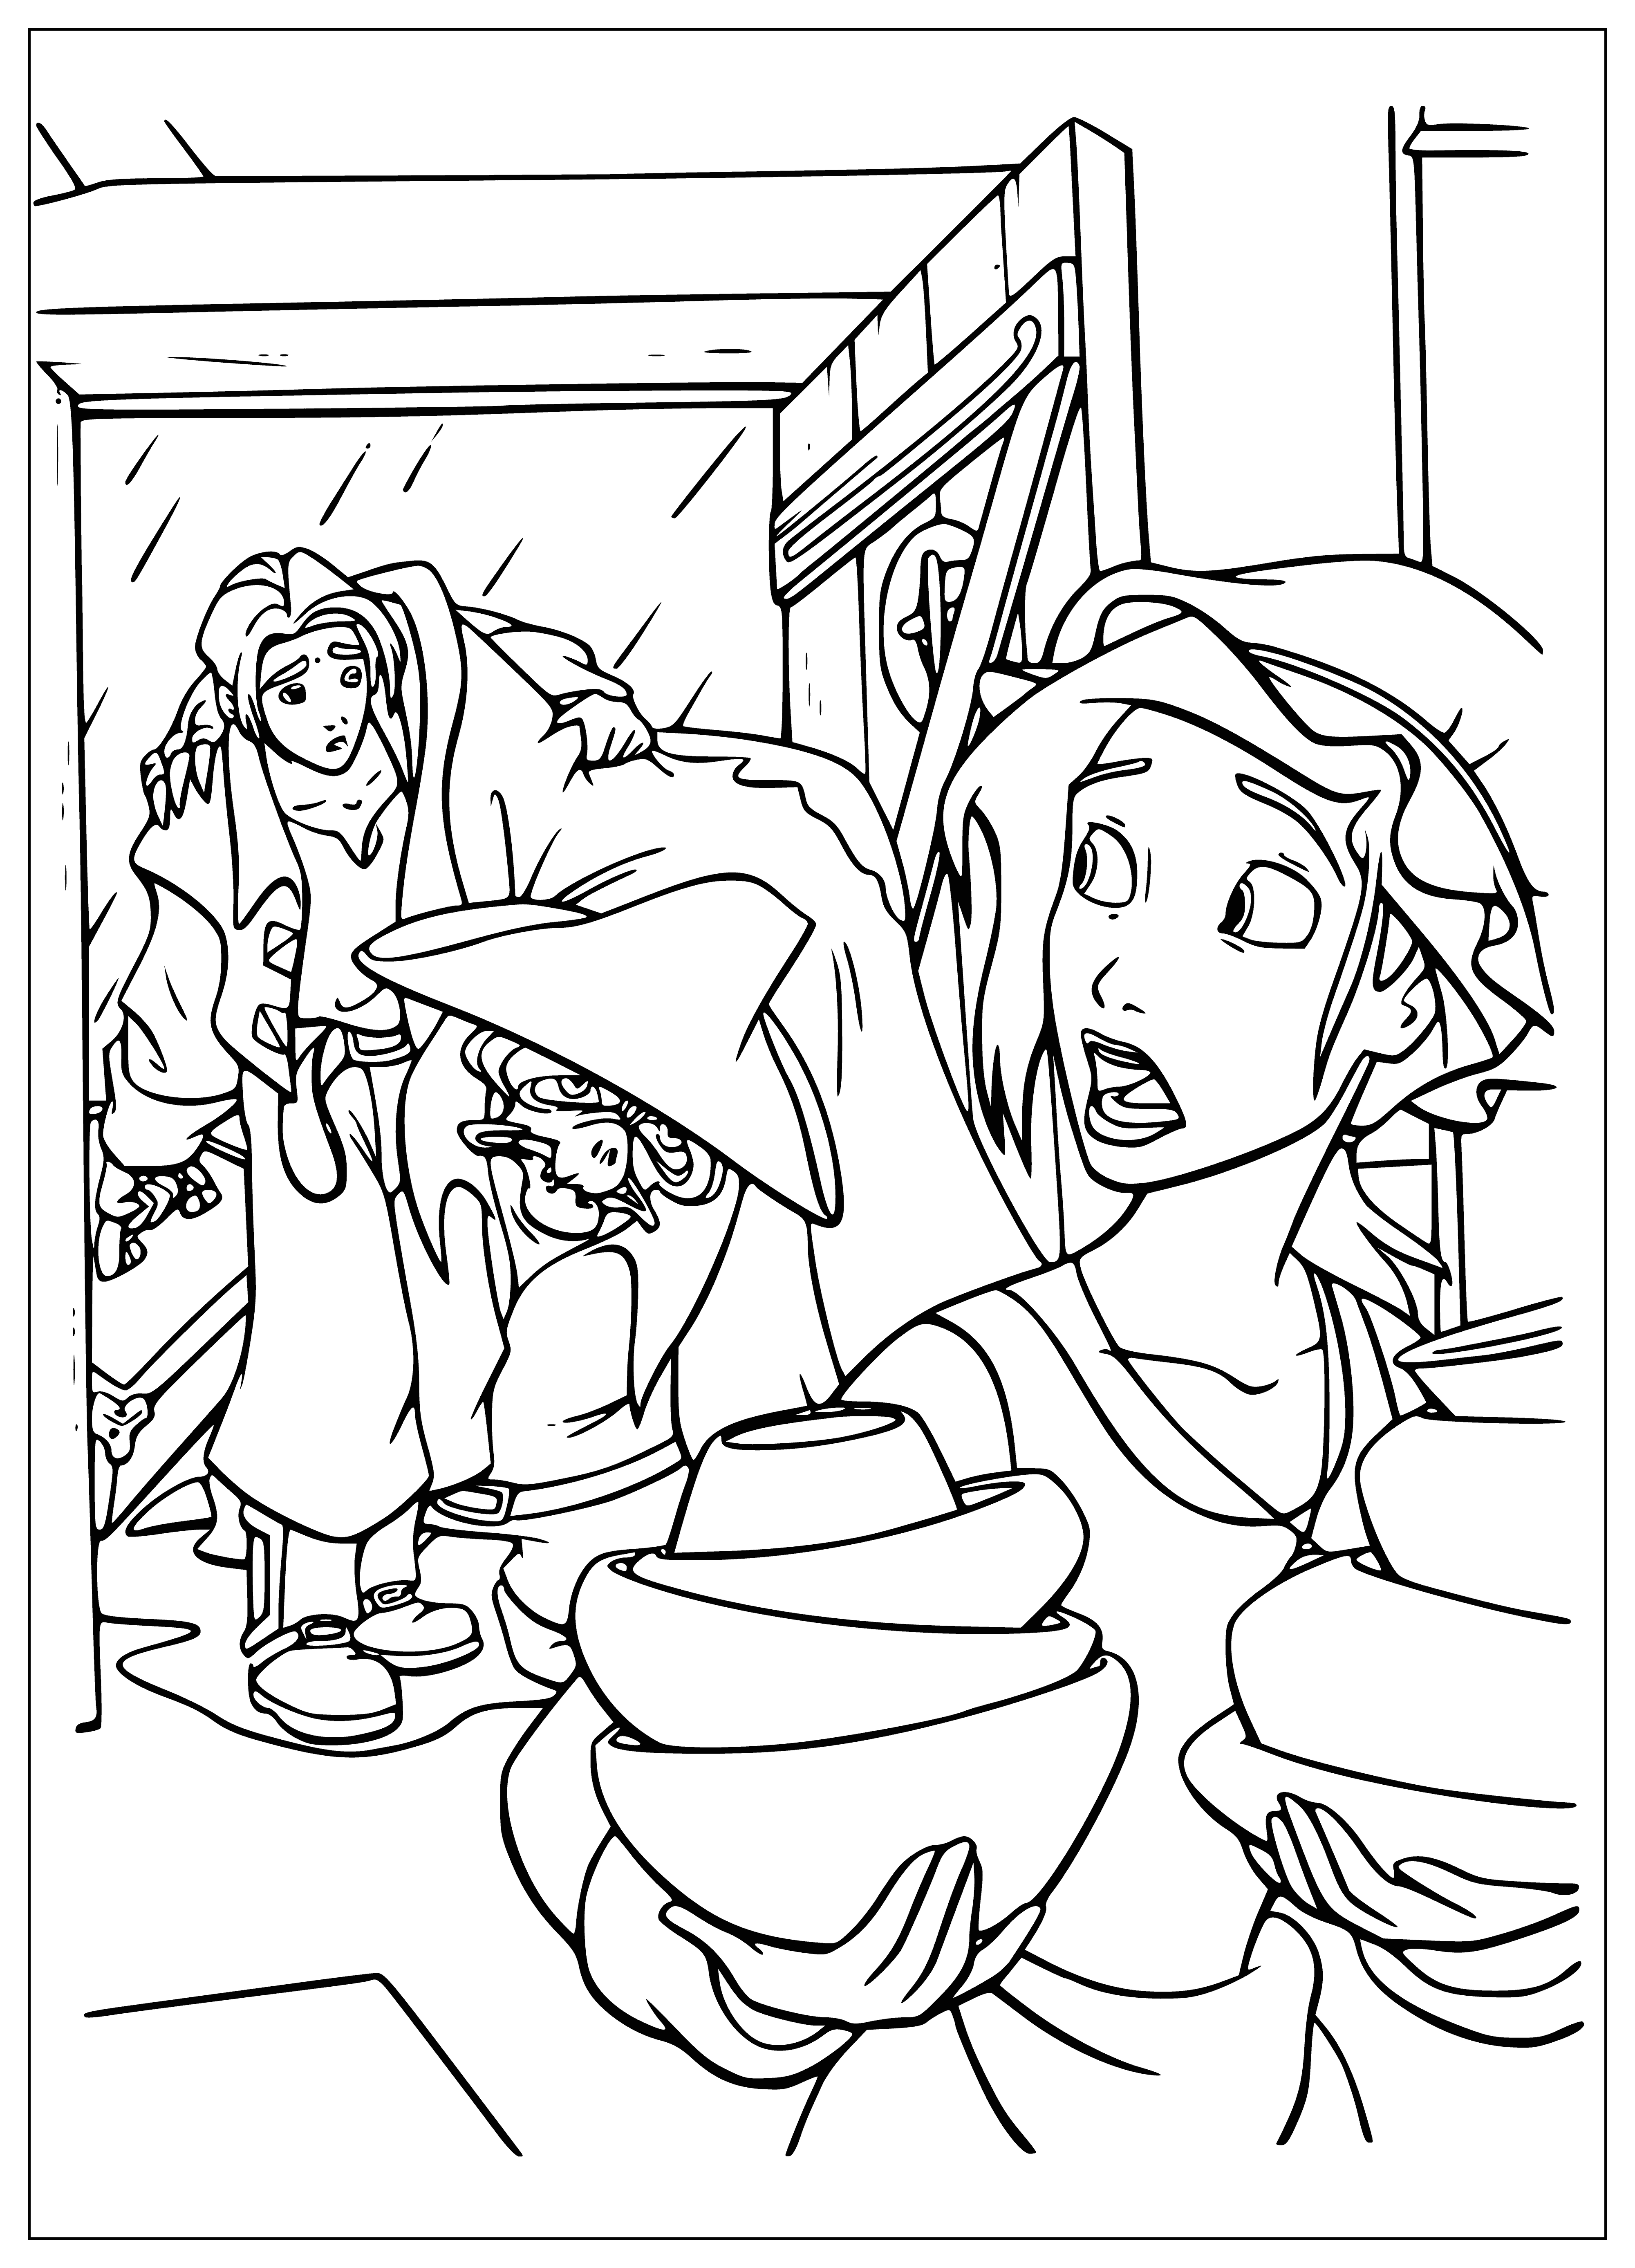 Old sailor coloring page